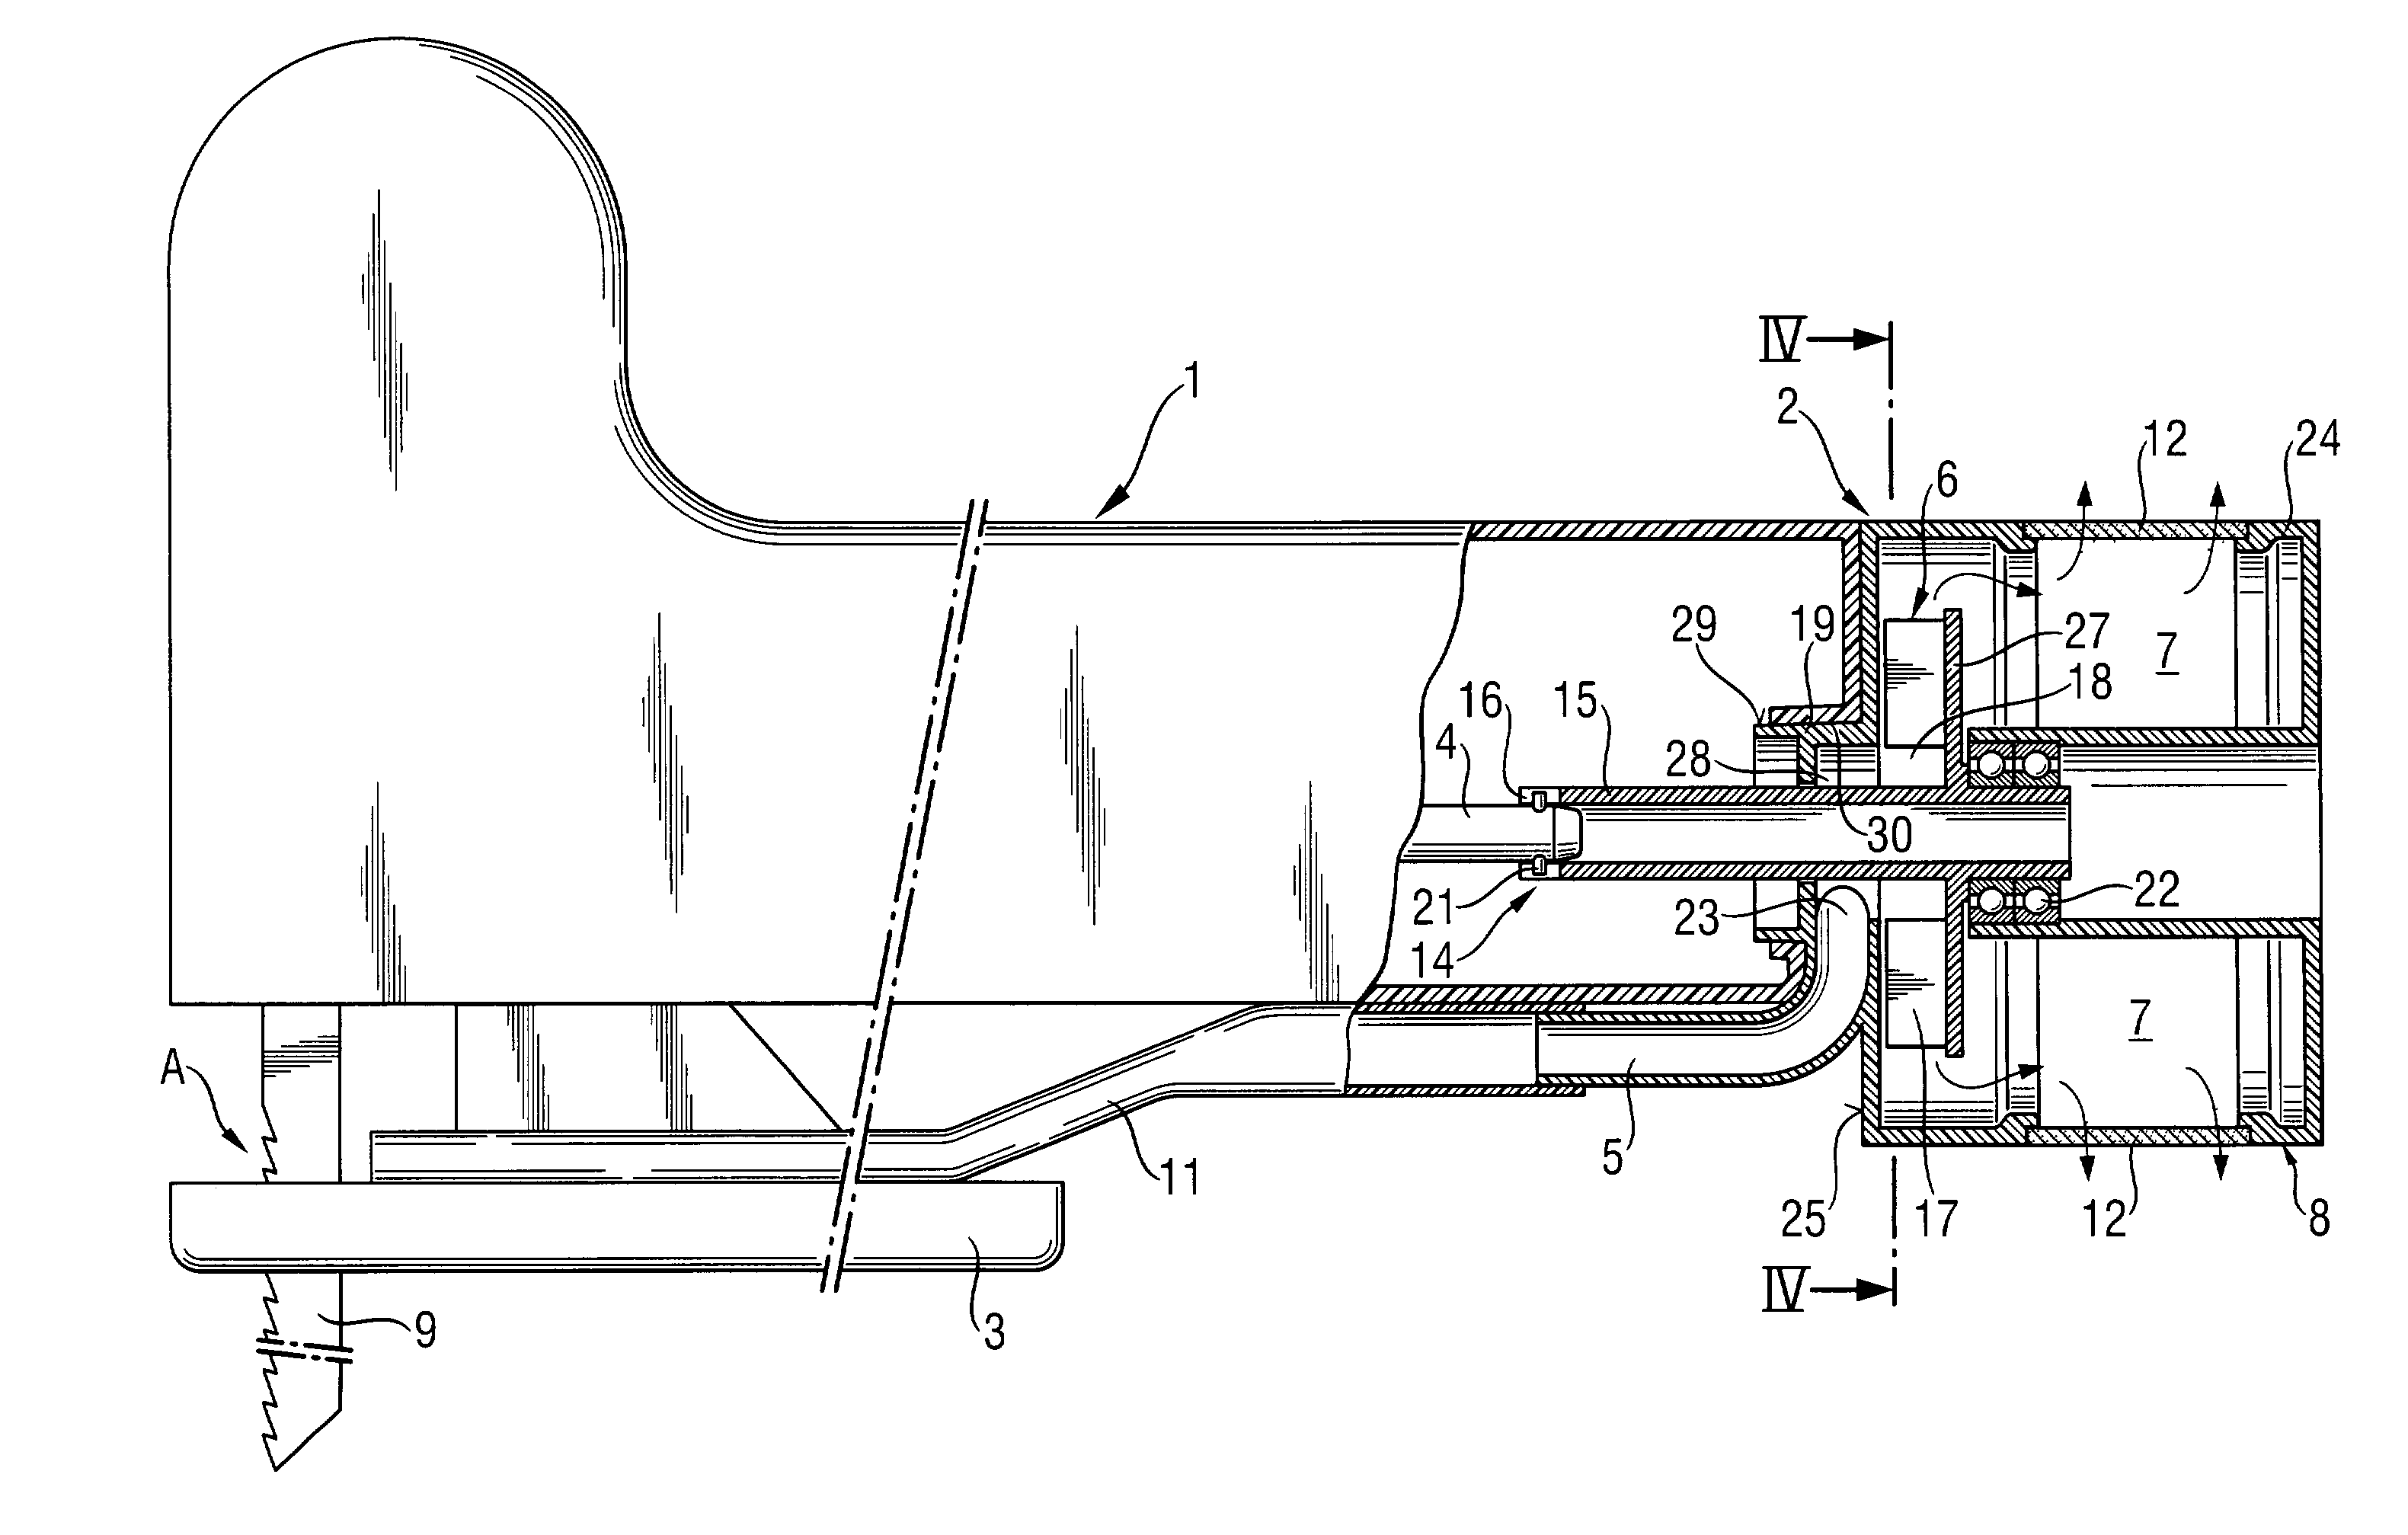 Hand-held power tool with a suction device